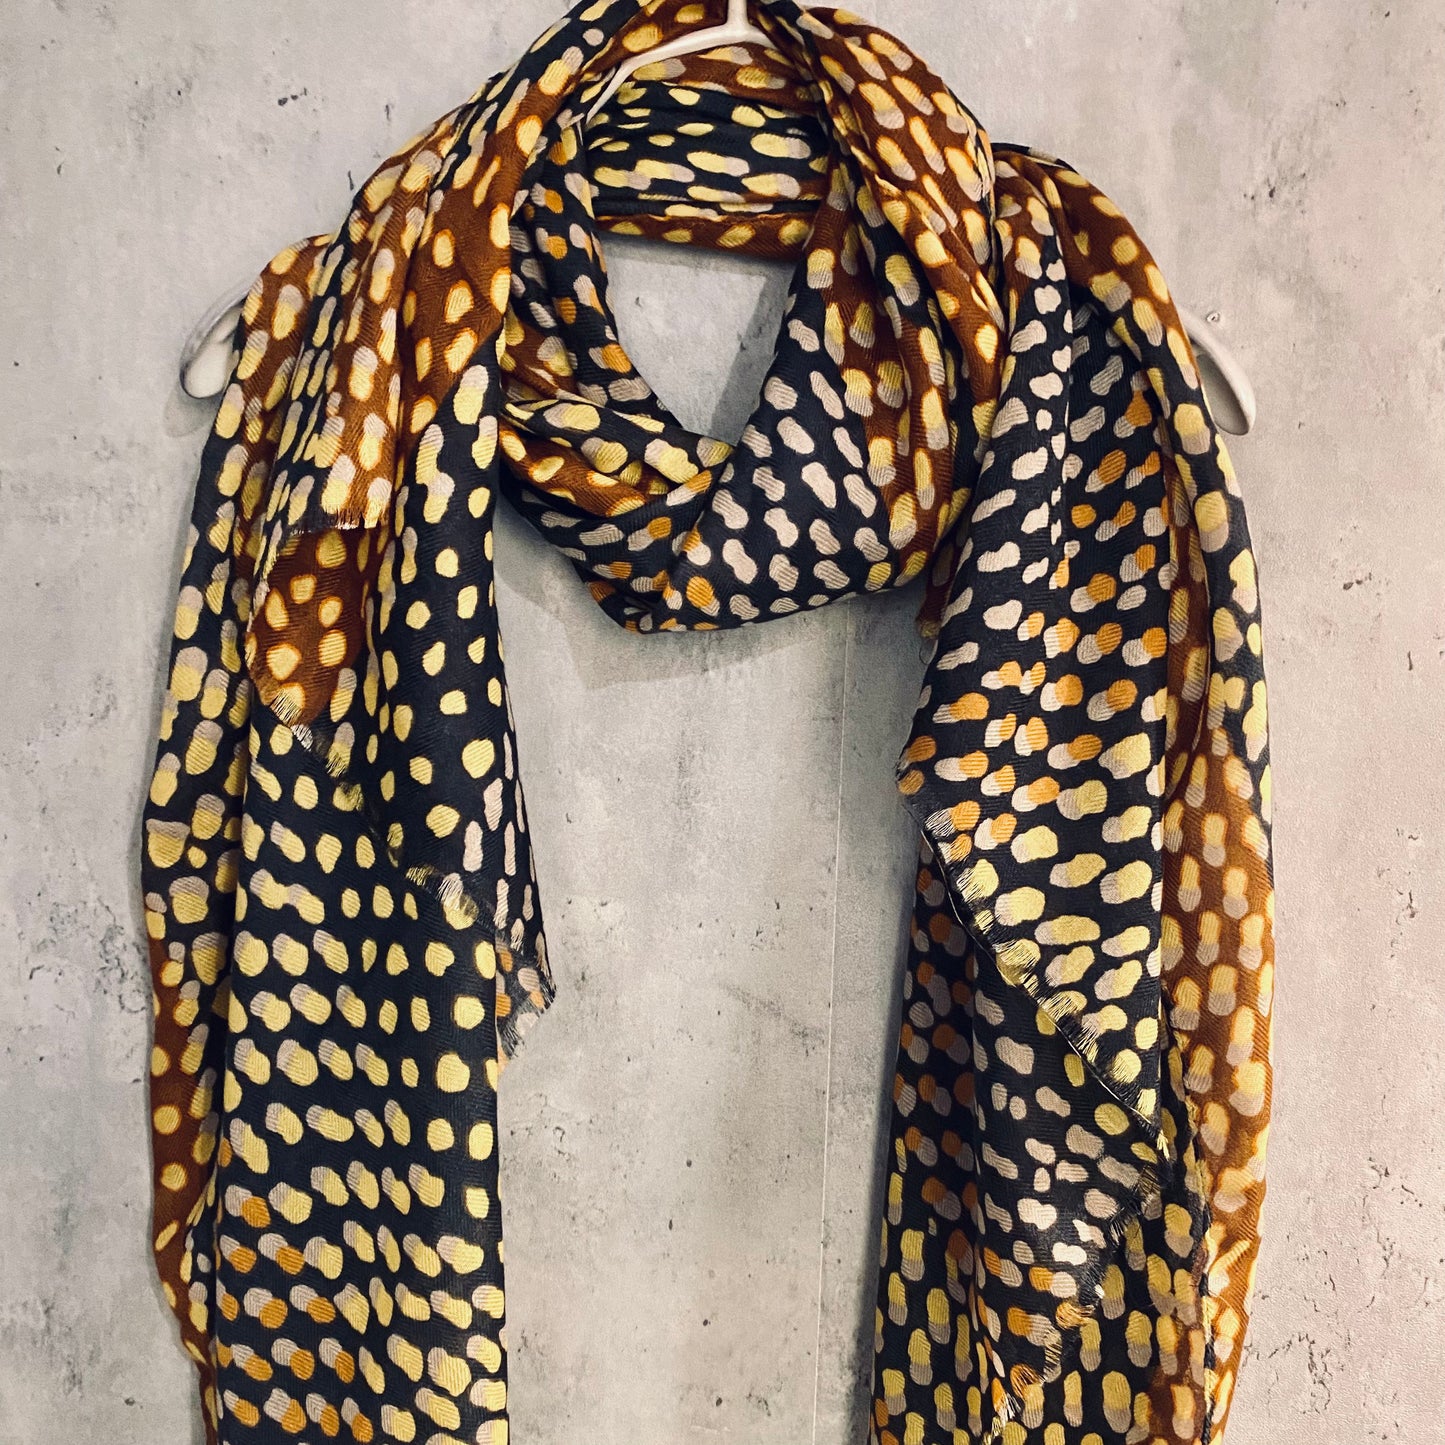 Seamless Polka Dot Pattern Yellow Cotton Scarf/Summer Autumn Winter Scarf/Gift For Mom/Gift For Her Birthday Christmas/Scarf Women/UK Seller